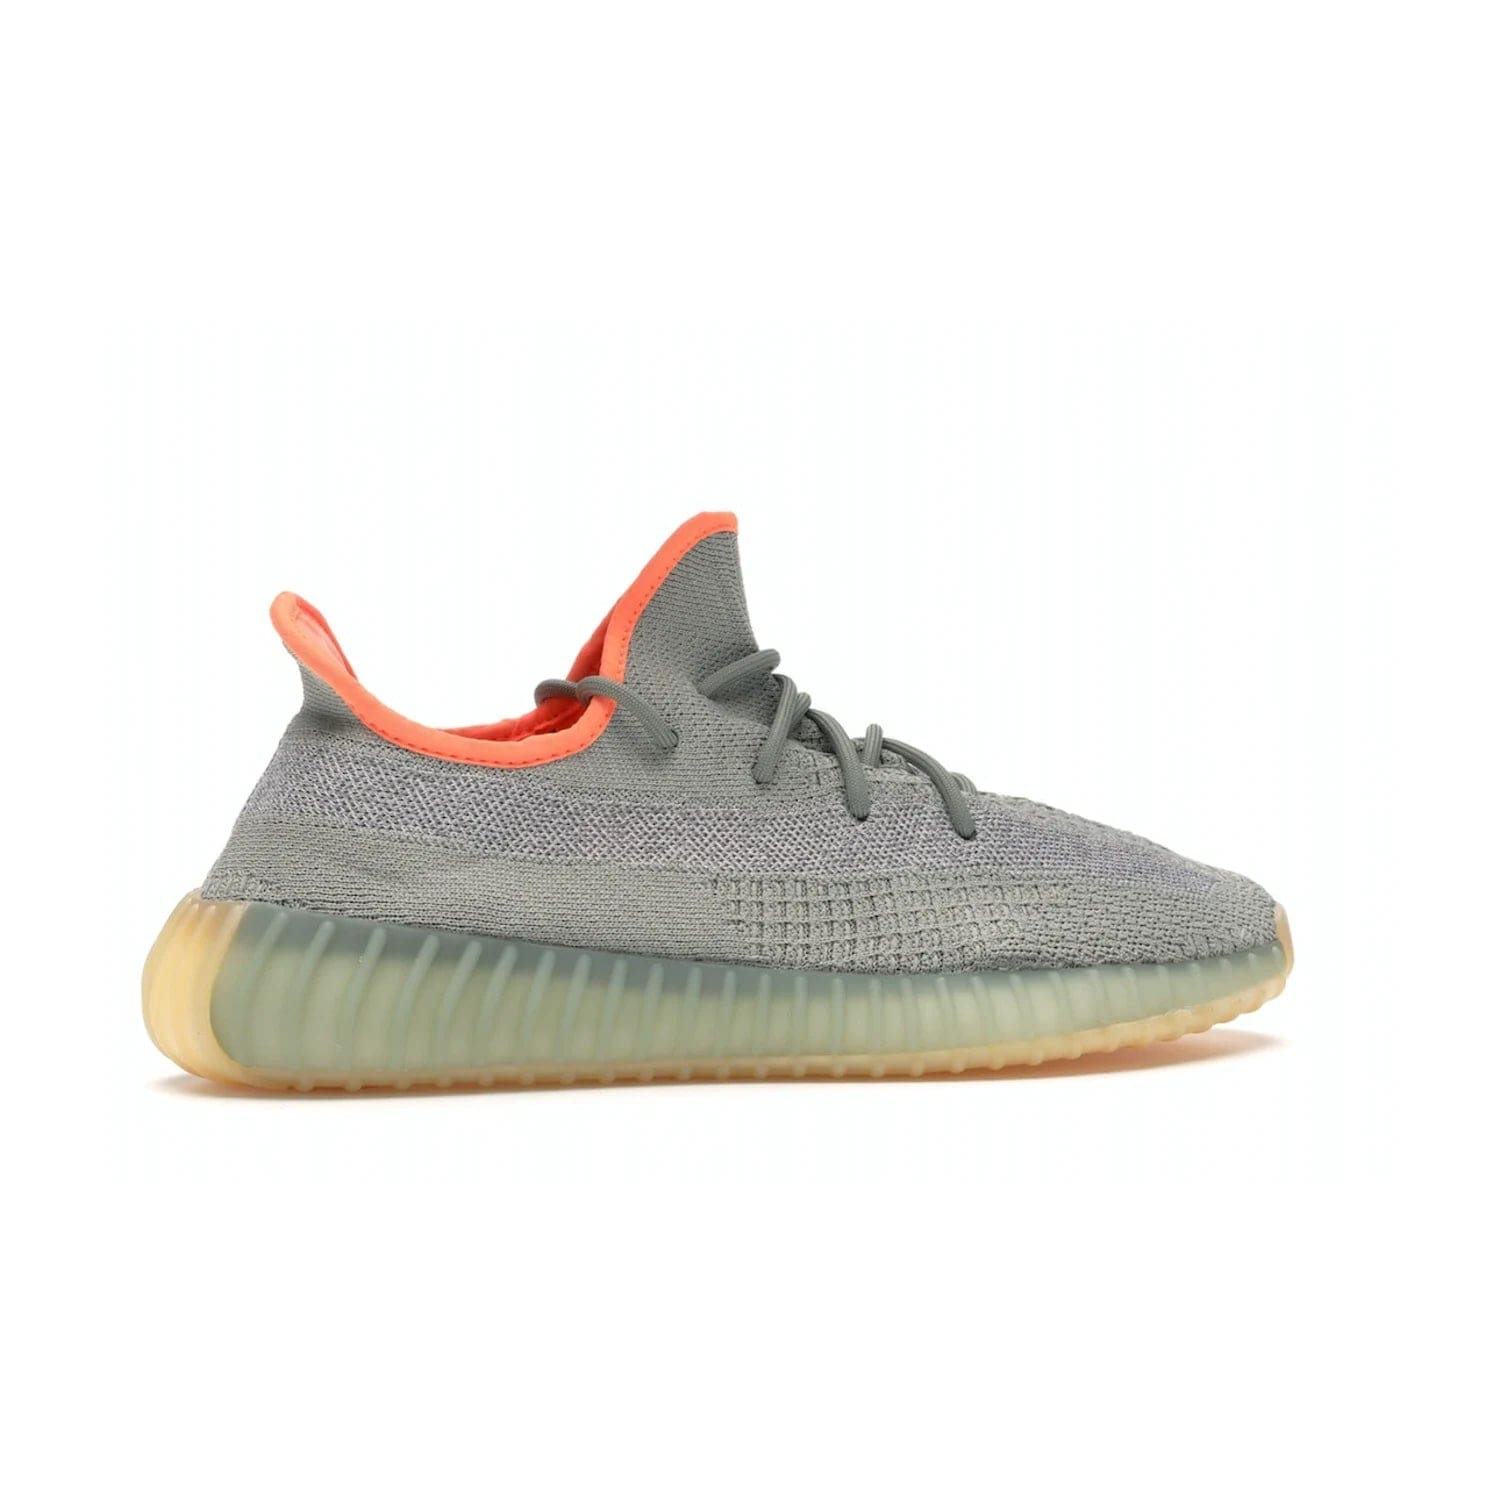 adidas Yeezy Boost 350 V2 Desert Sage - Image 35 - Only at www.BallersClubKickz.com - Upgrade your style with the adidas Yeezy Boost 350 V2 Desert Sage. This 350V2 features a Desert Sage primeknit upper with tonal side stripe, and an orange-highlighted translucent Boost cushioning sole. Stay on-trend in effortless style.